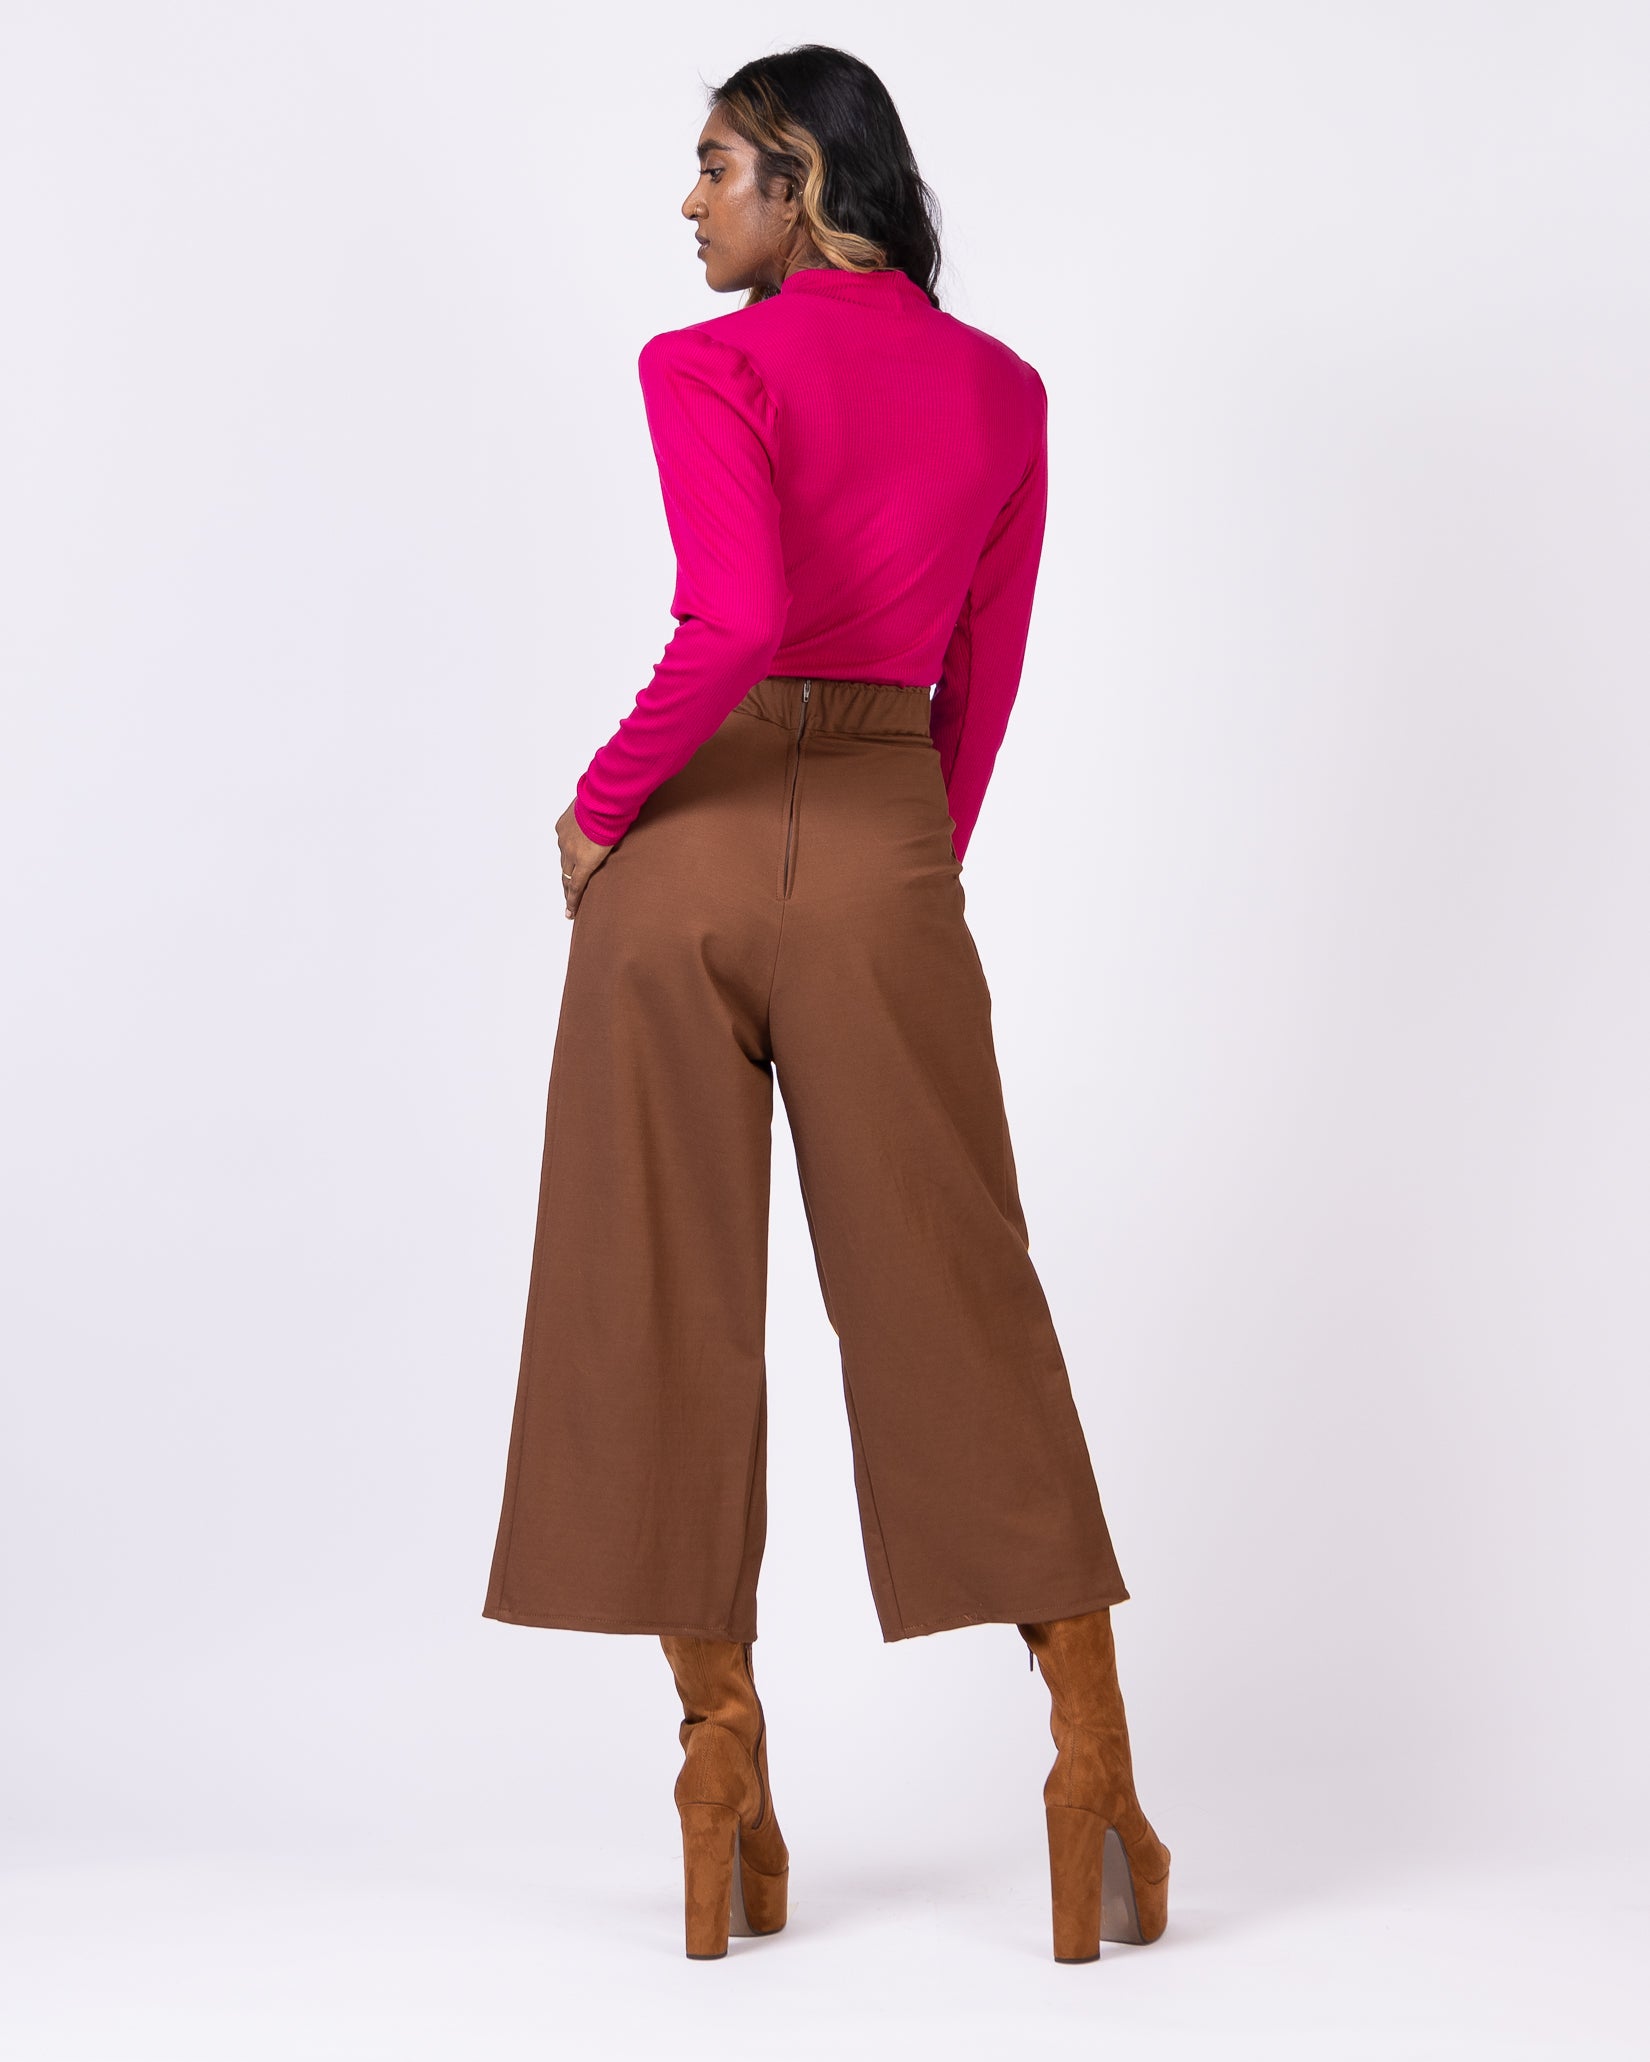 LASHE - Ankara Palazzo Pants in Brown - Matching Top Available by nabor -  Afrikrea